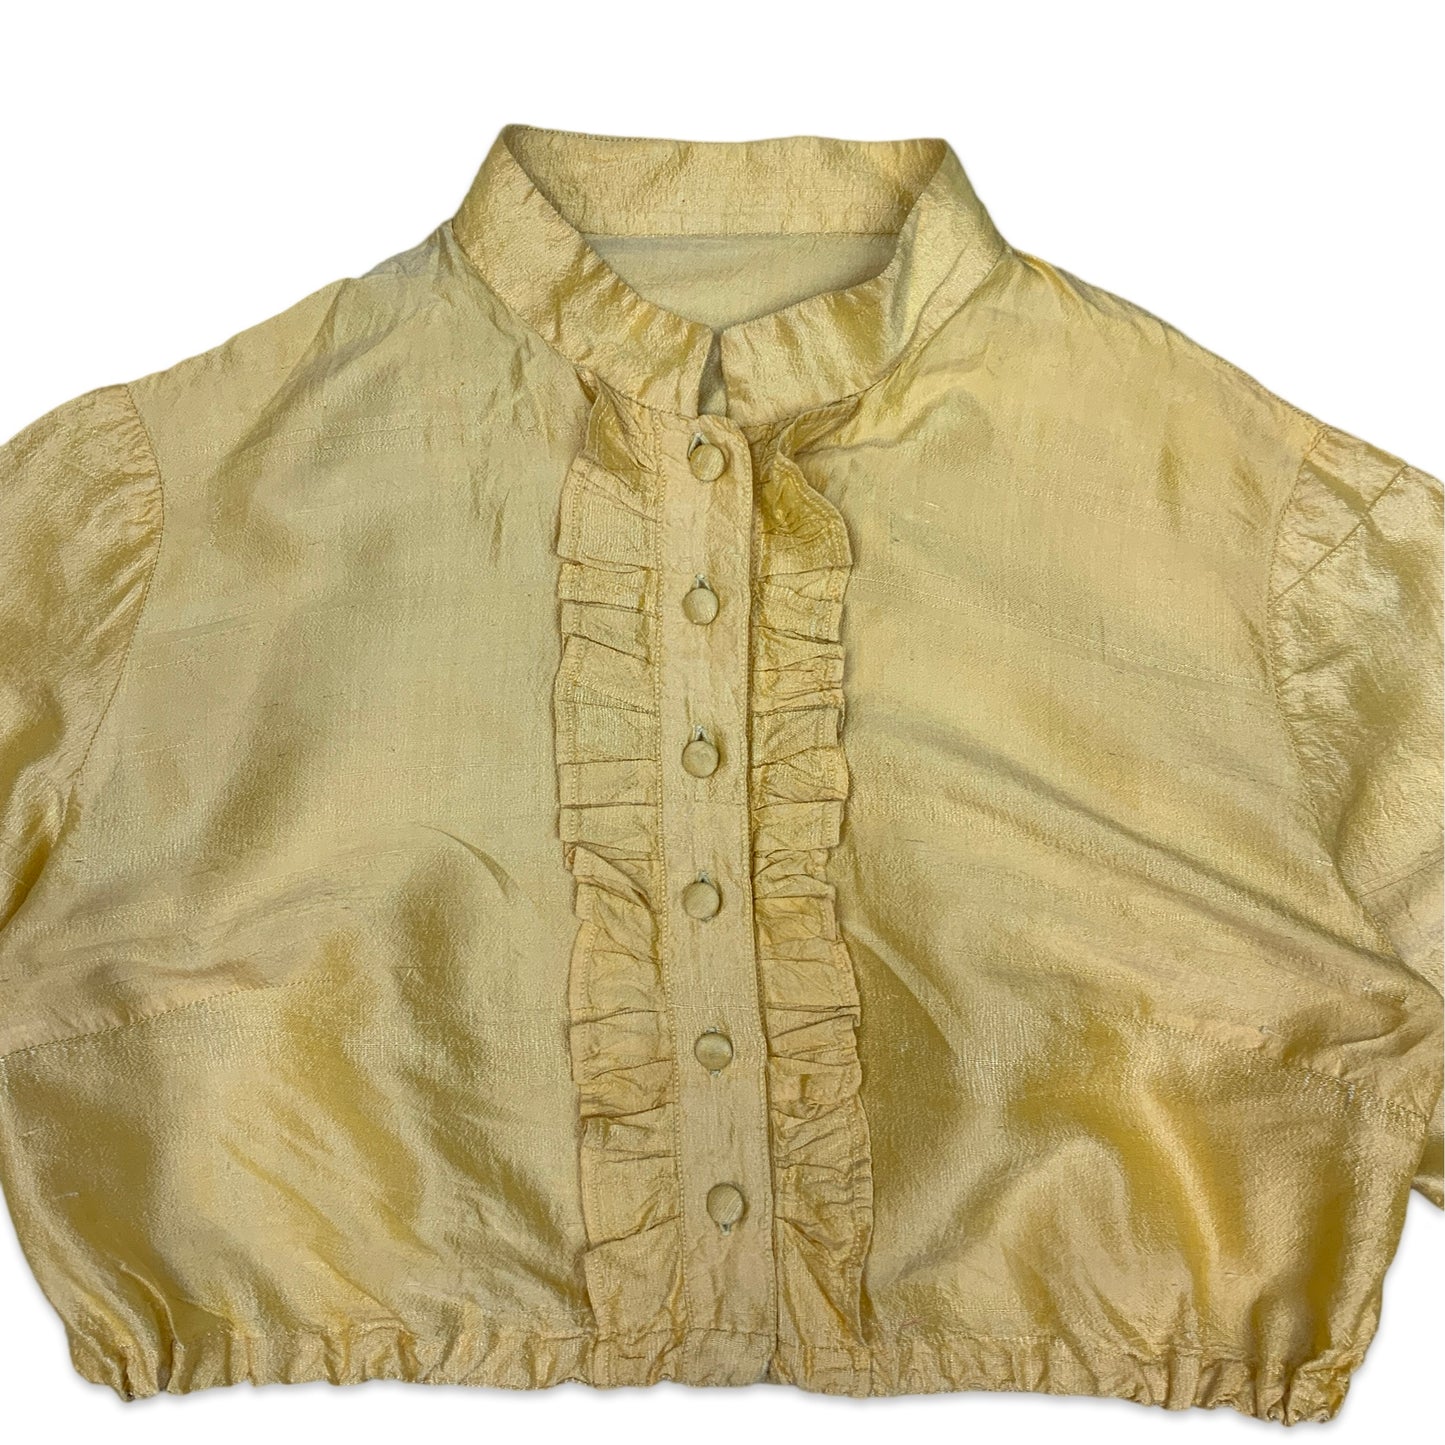 80s Yellow Button Up Crop Top with Pleats 10 12